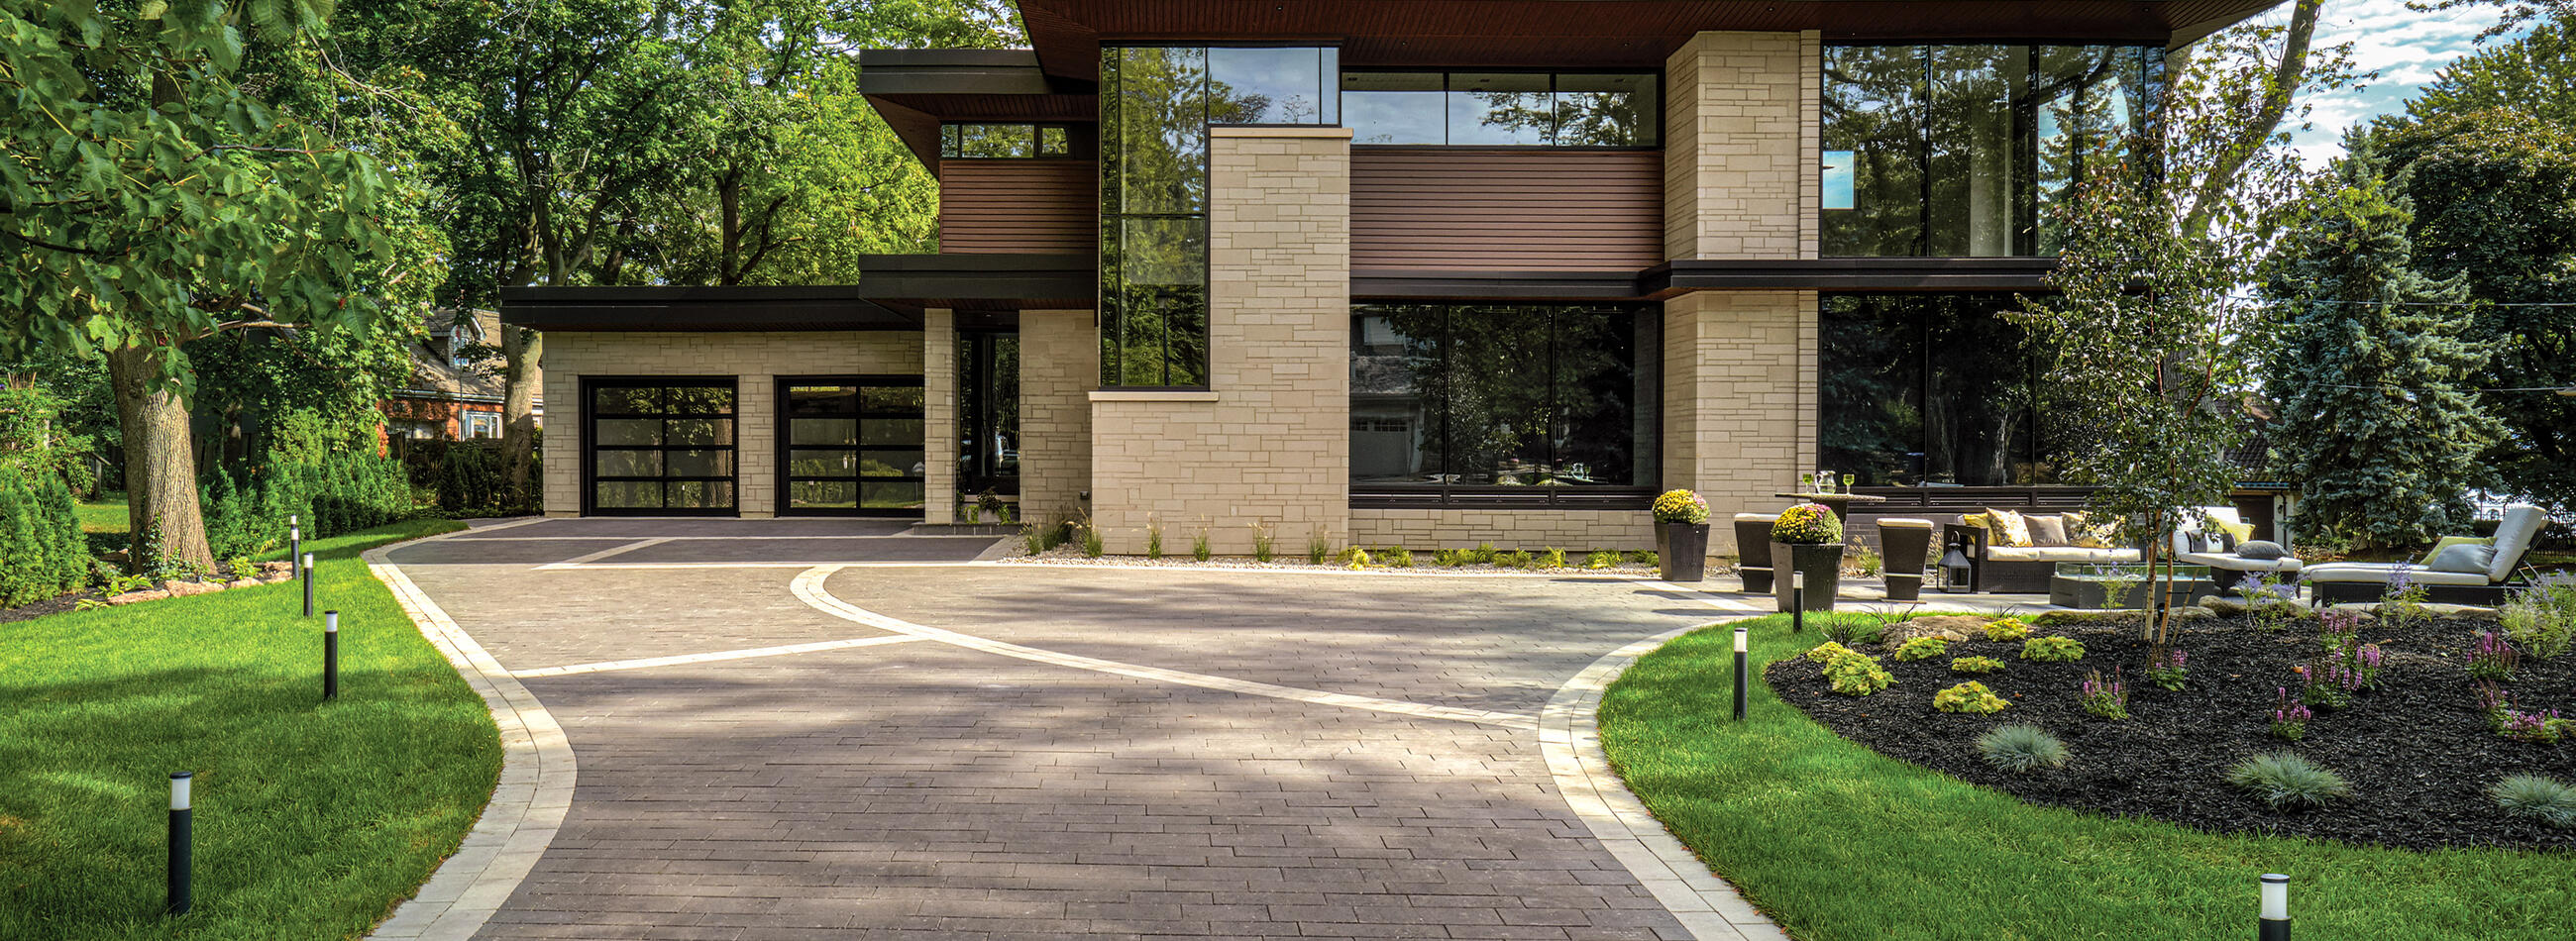 House using Contempo products and driveway using Presidio products from Brampton Brick